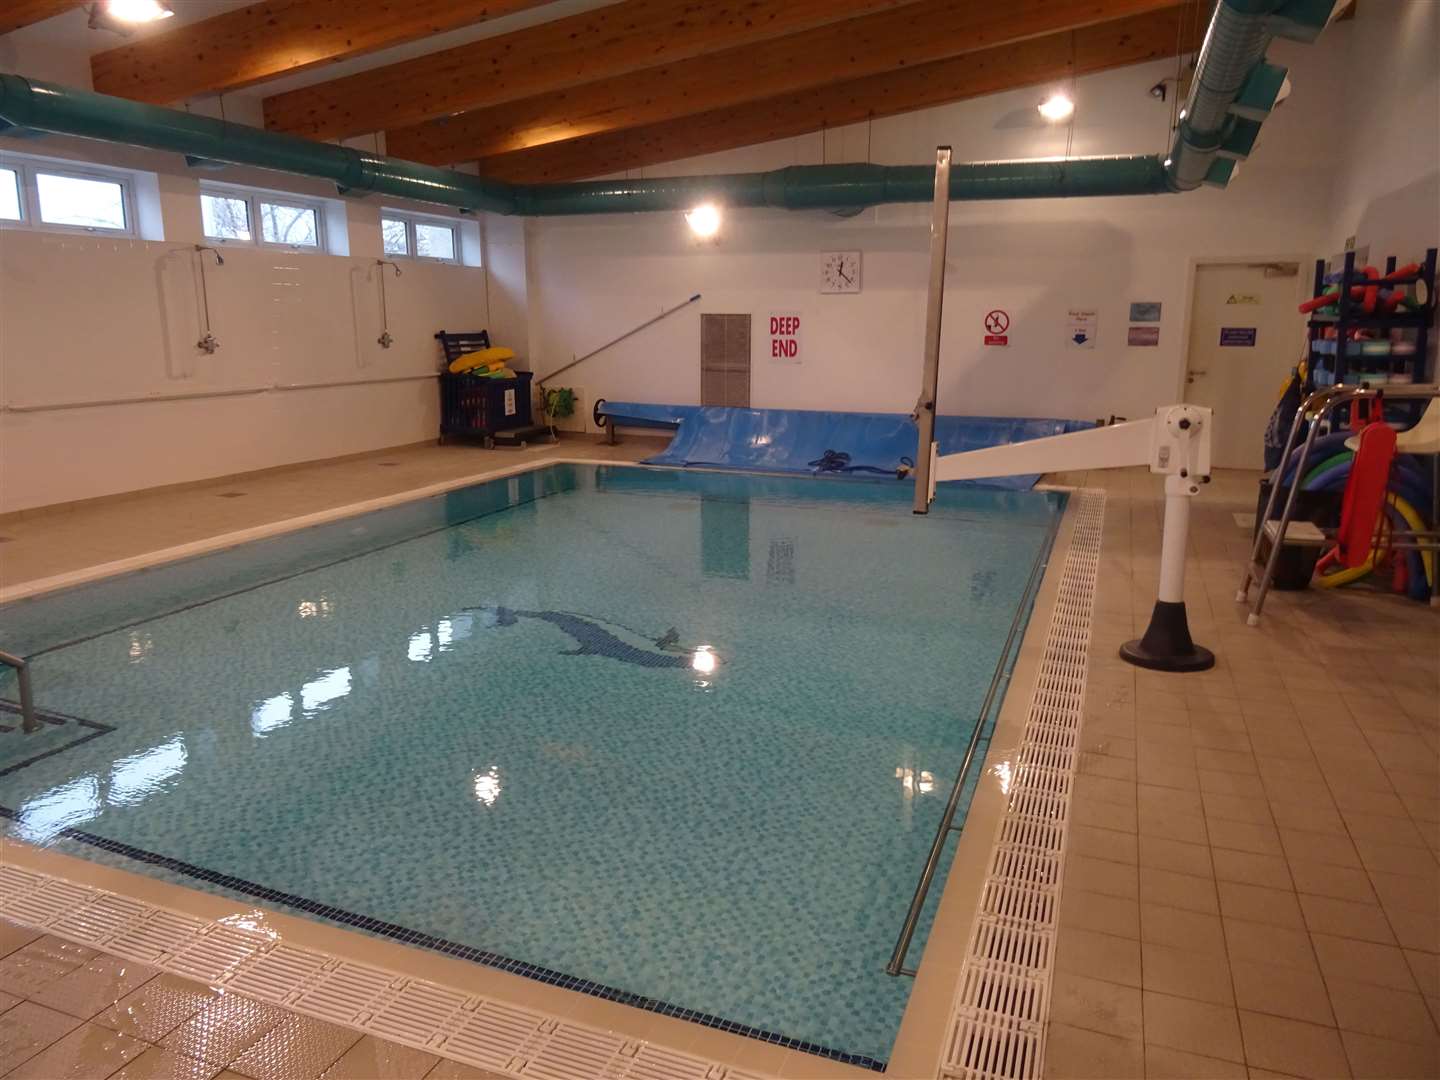 The Moray Hydrotherapy Pool, located beside Forres Swimming Pool, is set to reopen on October 11.